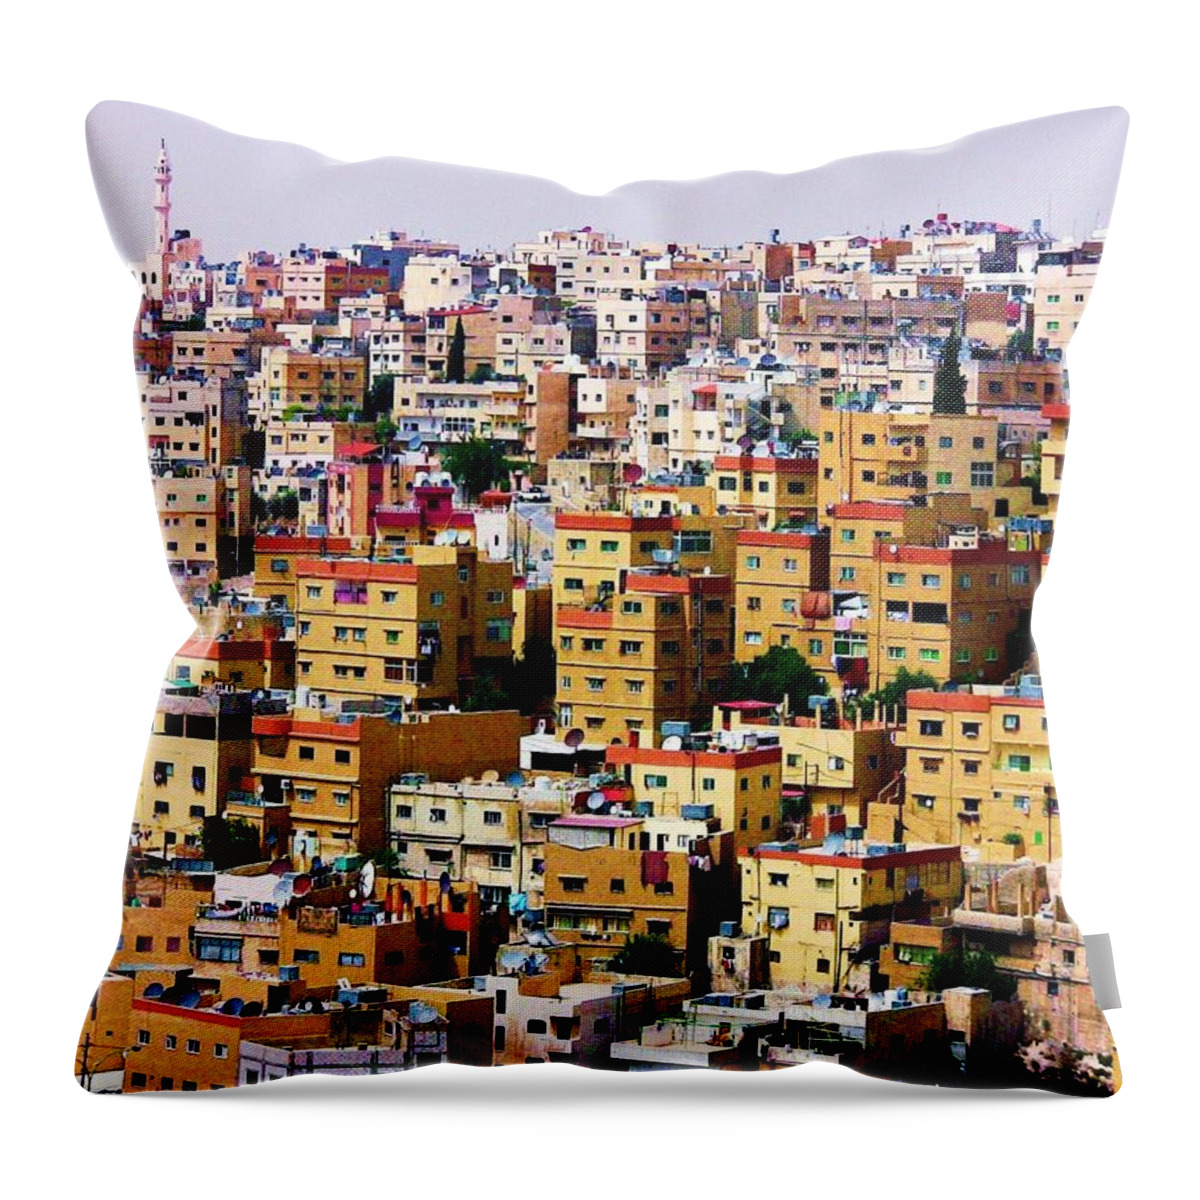 Tranquility Throw Pillow featuring the photograph Jordanien by Rolf Bach